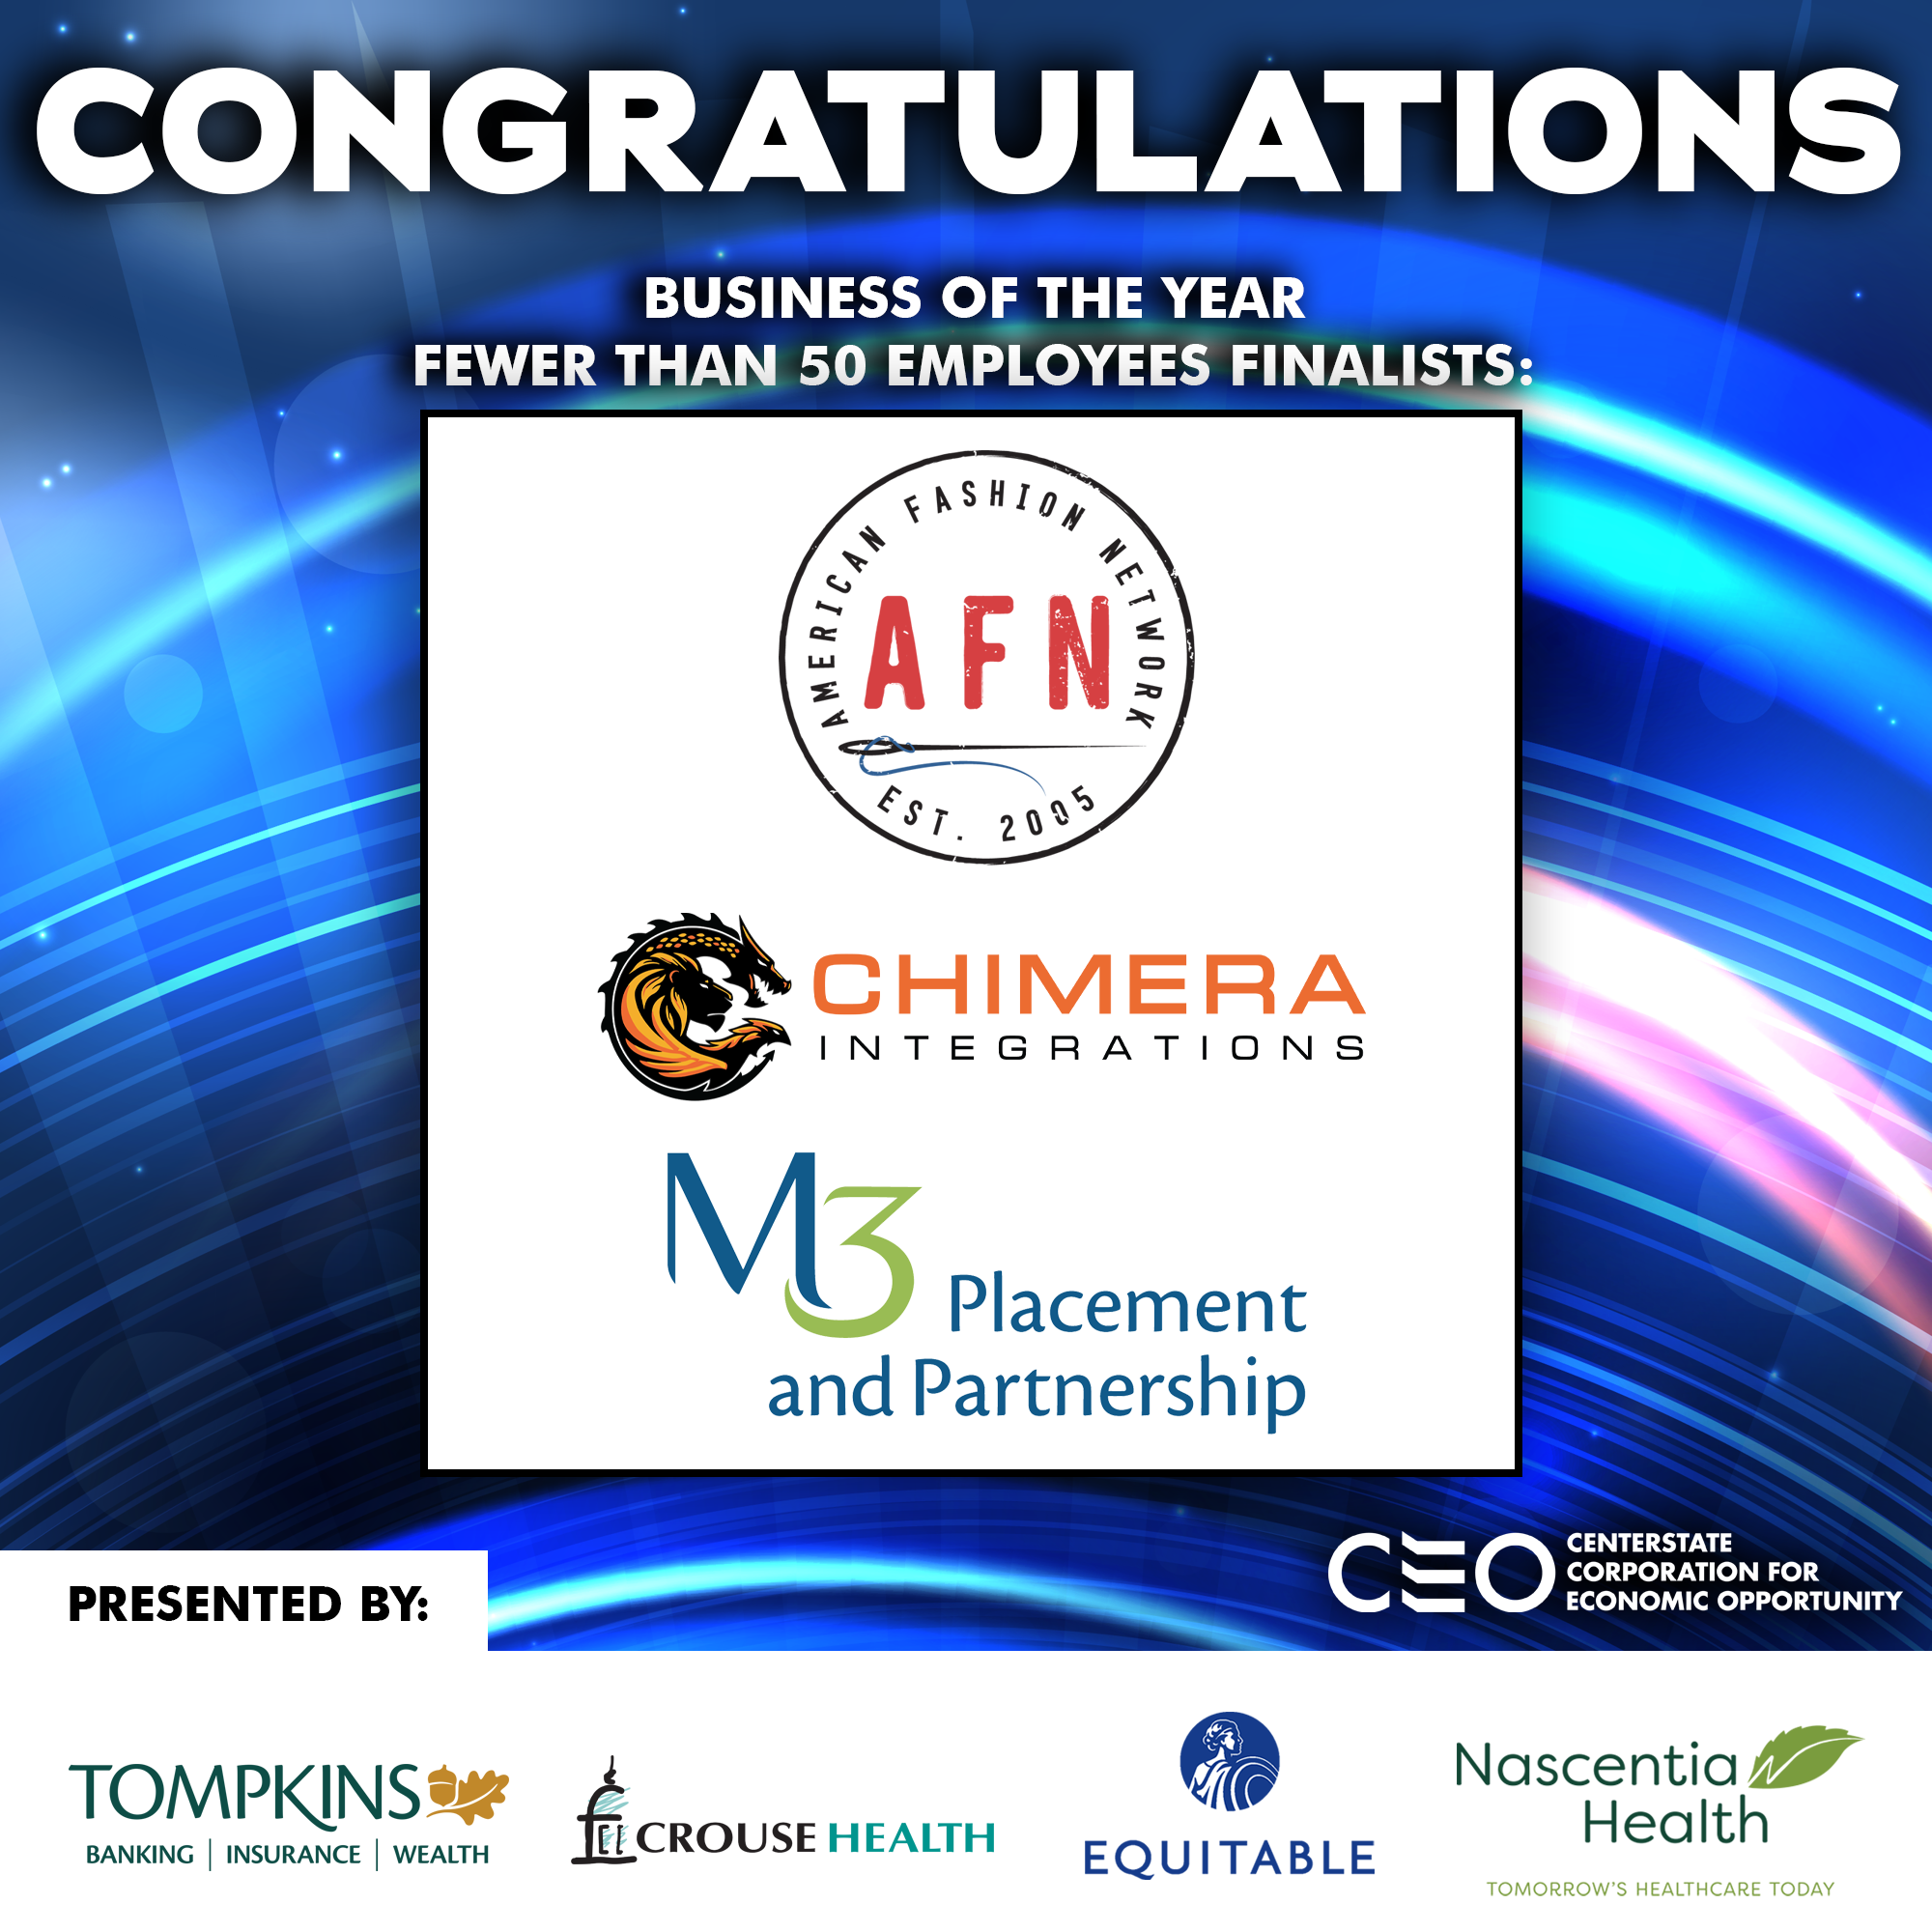 M3 Placement and Partnership named a finalist in CenterState CEO 2023 Business of the Year Awards